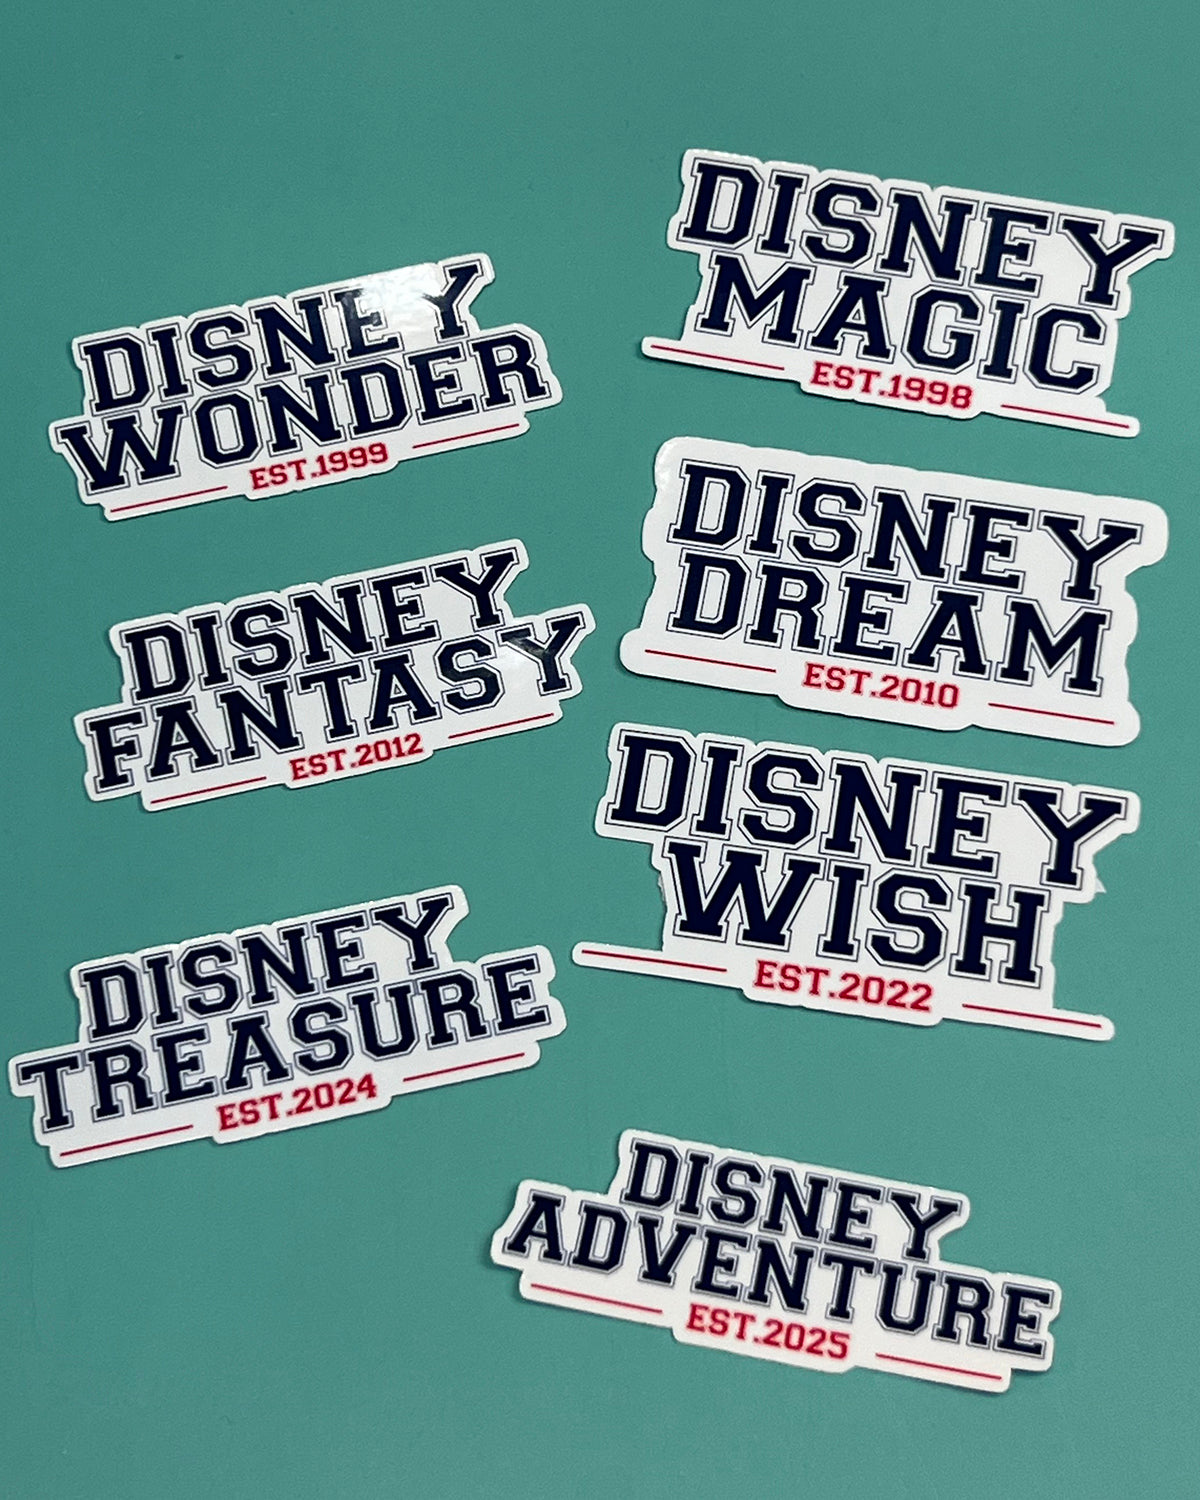 Disney Cruise Line Established Sticker Pack - Magic, Wonder, Dream, Fantasy and Wish. Now including Treasure and Adventure!